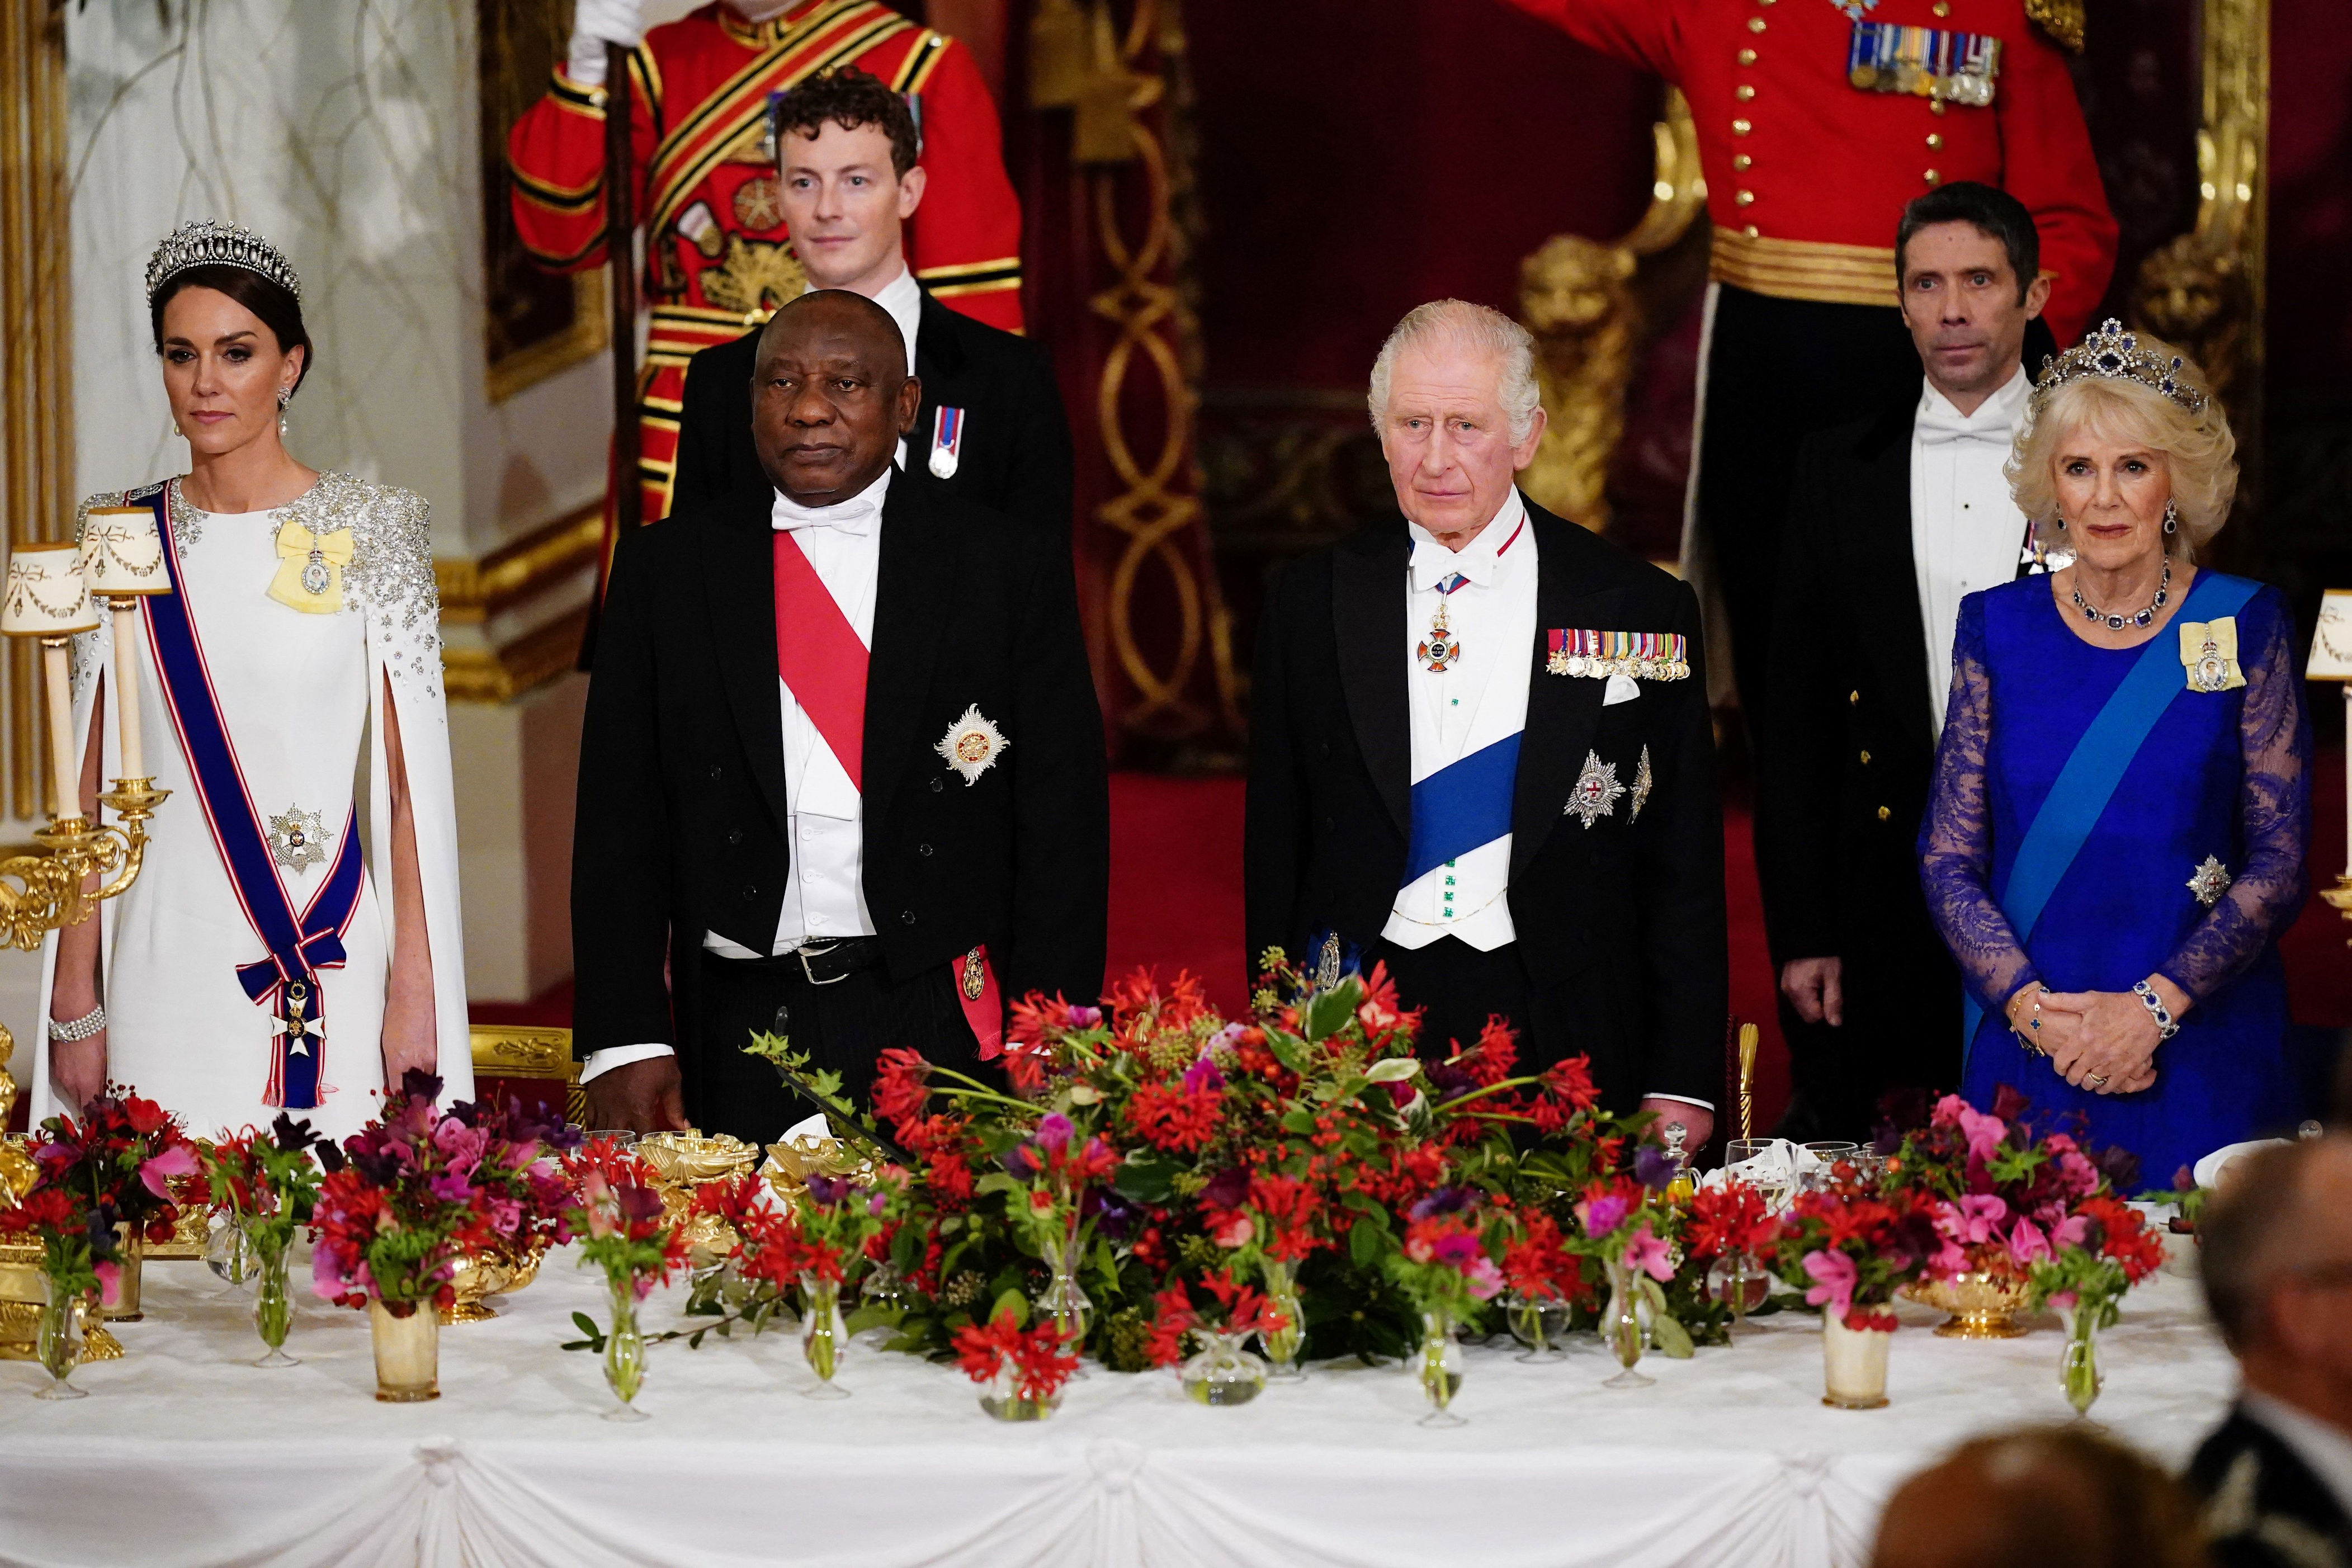 <p>Princess Kate, President of South Africa Cyril Ramaphosa, King Charles III and Queen Consort Camilla attended a state banquet at Buckingham Palace in London on Nov. 22, 2022 -- the first state visit hosted by the U.K. with Charles as monarch, and the first state visit to Britain by a South African leader since 2010. </p>